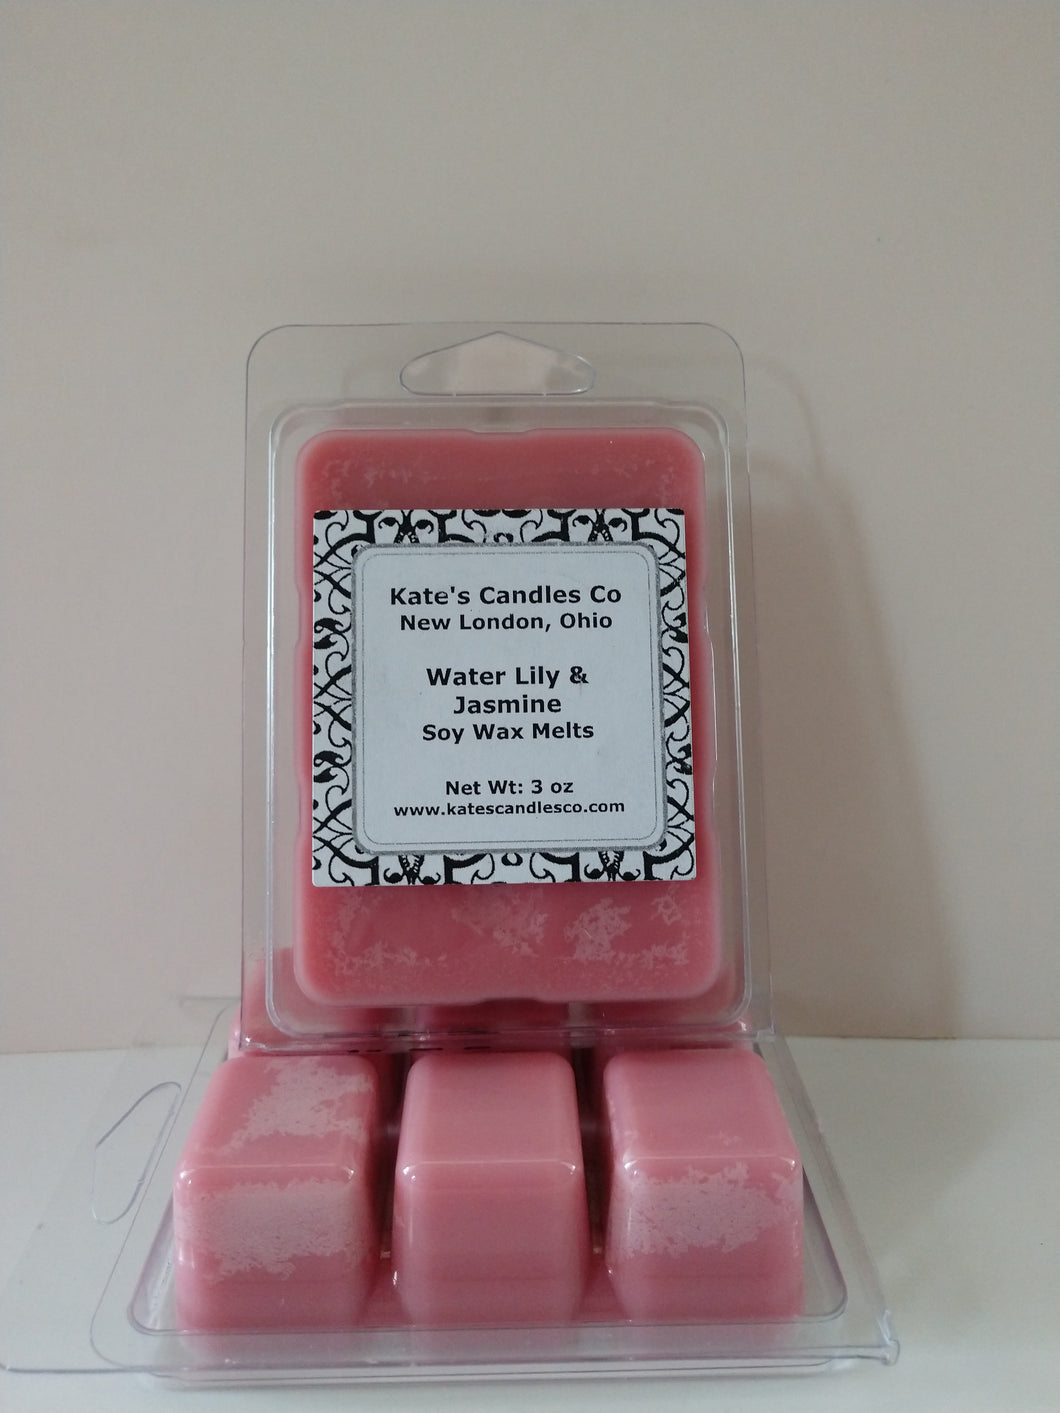 Water Lily and Jasmine Scented Wax Melts - Kate's Candles Co. Soy Candles